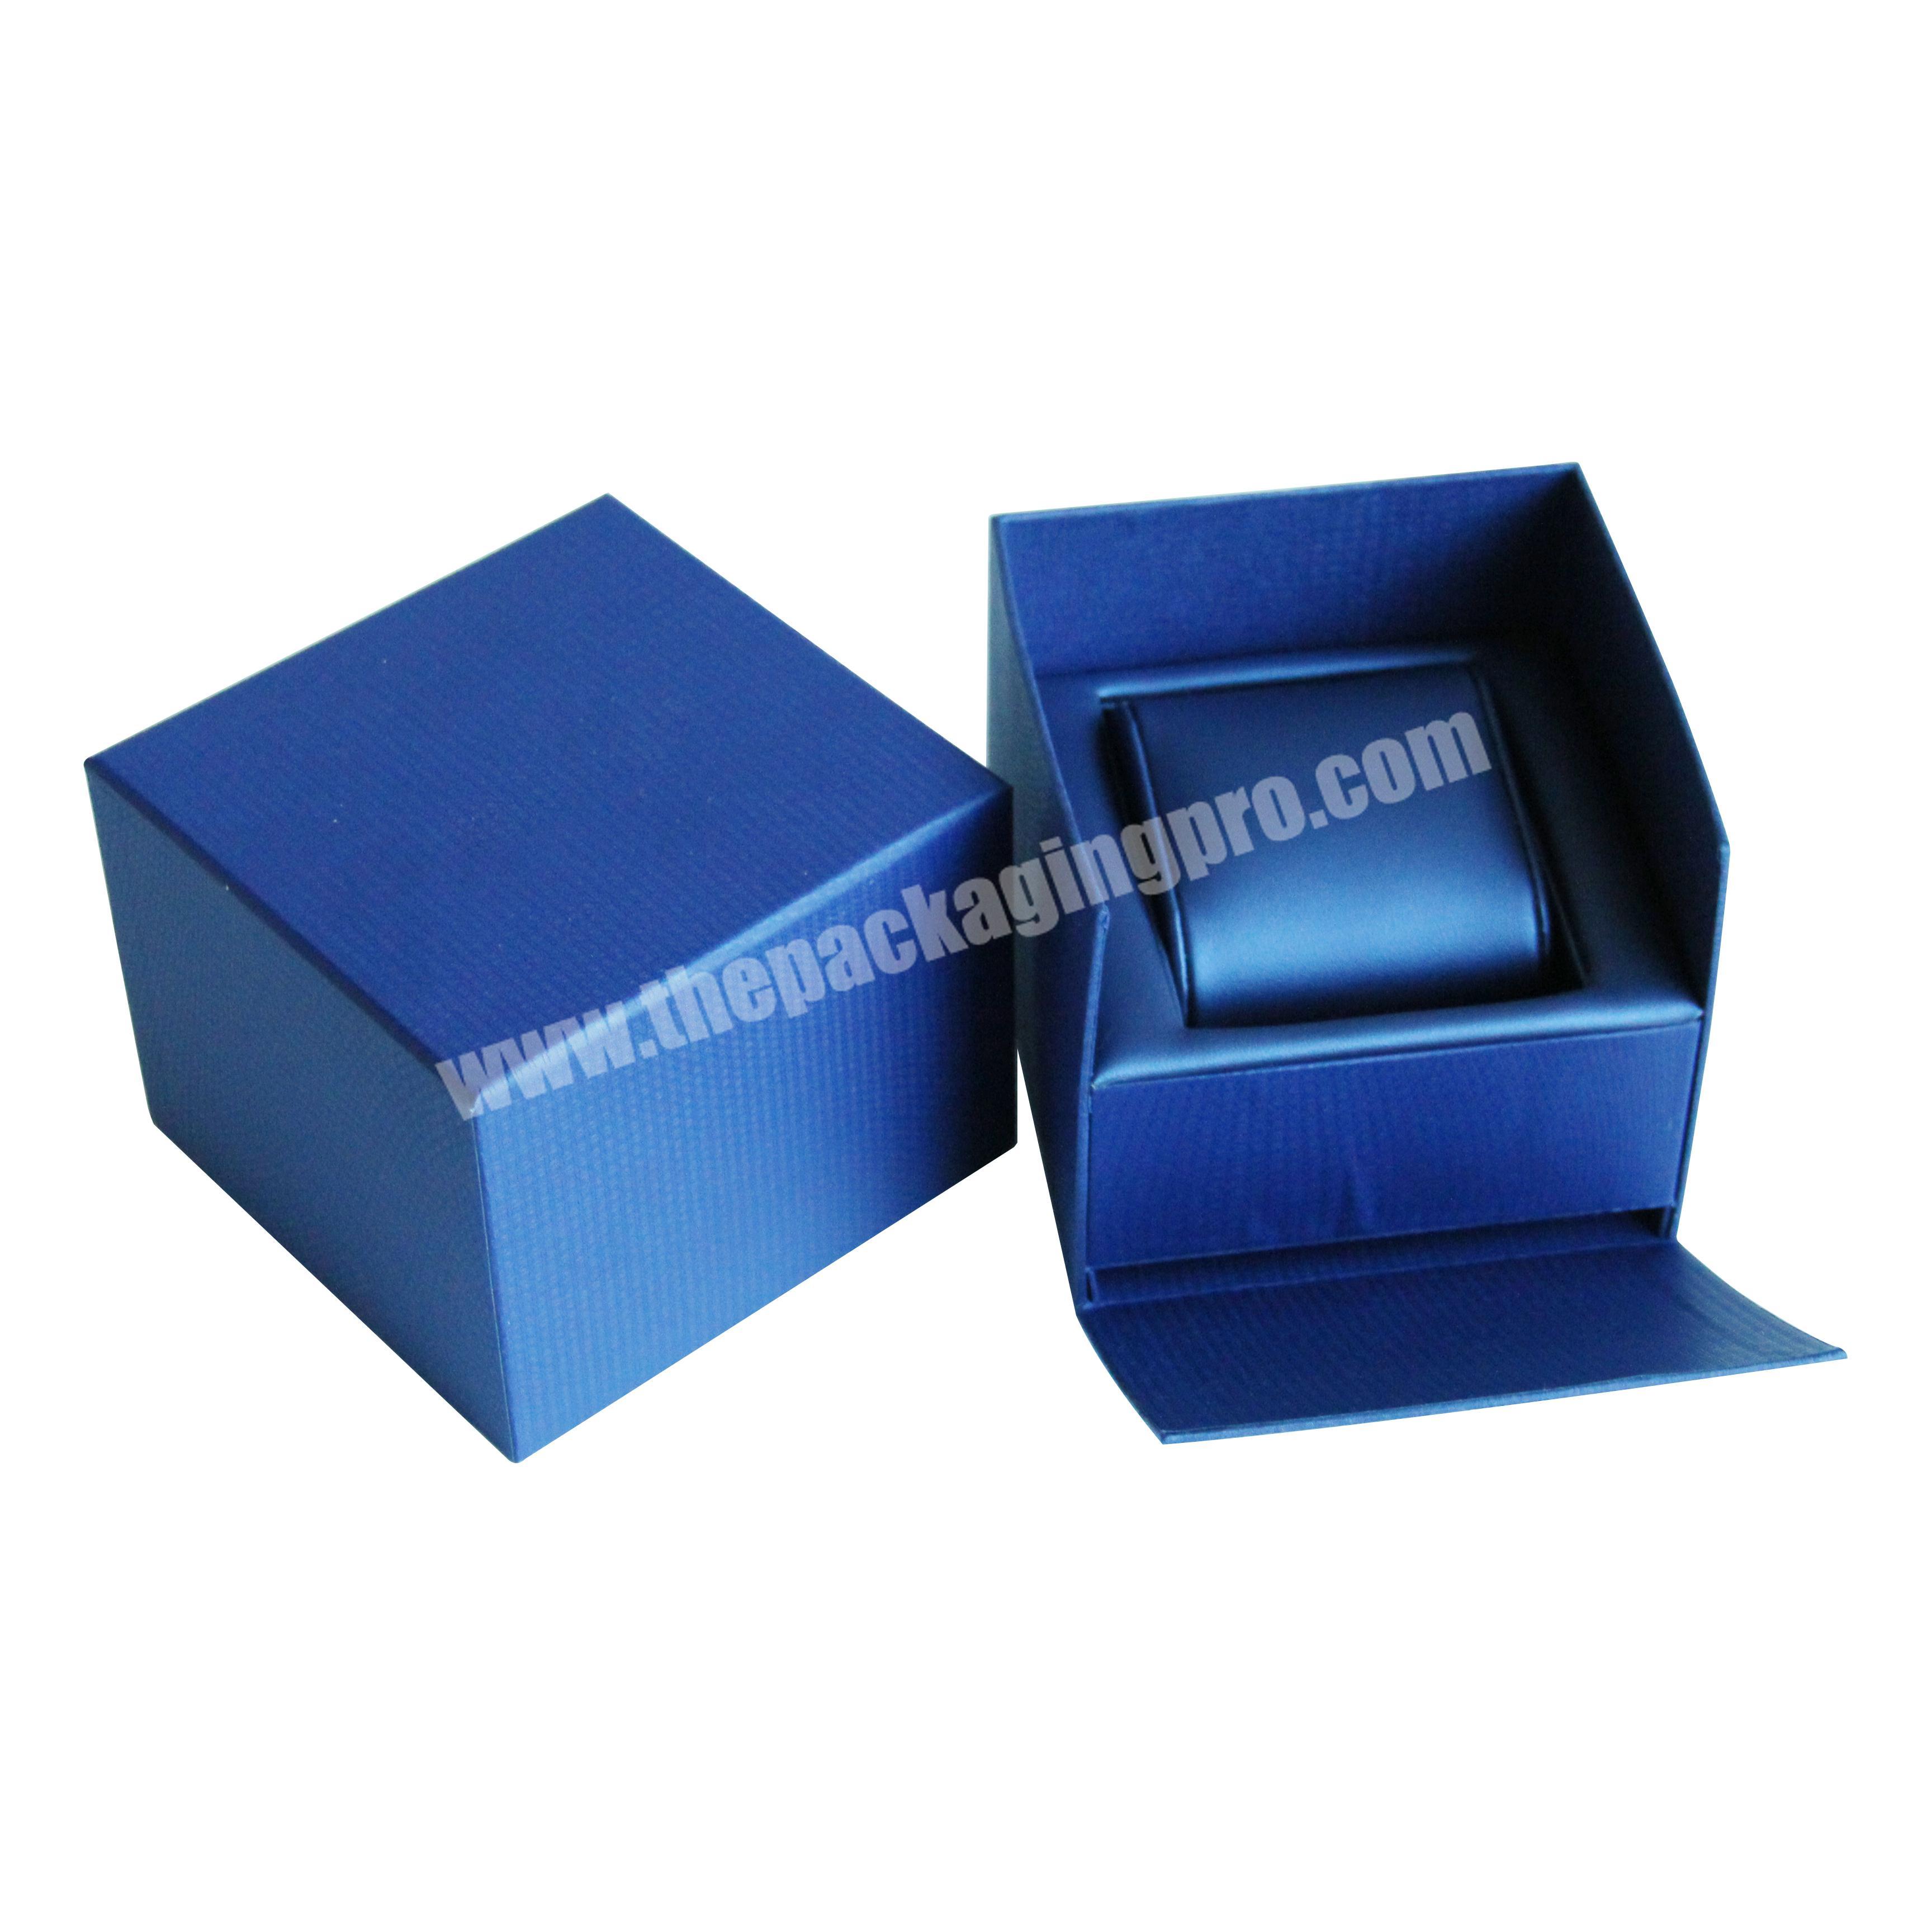 Manufacture luxury watch packaging box gift boxes with gold foil logo